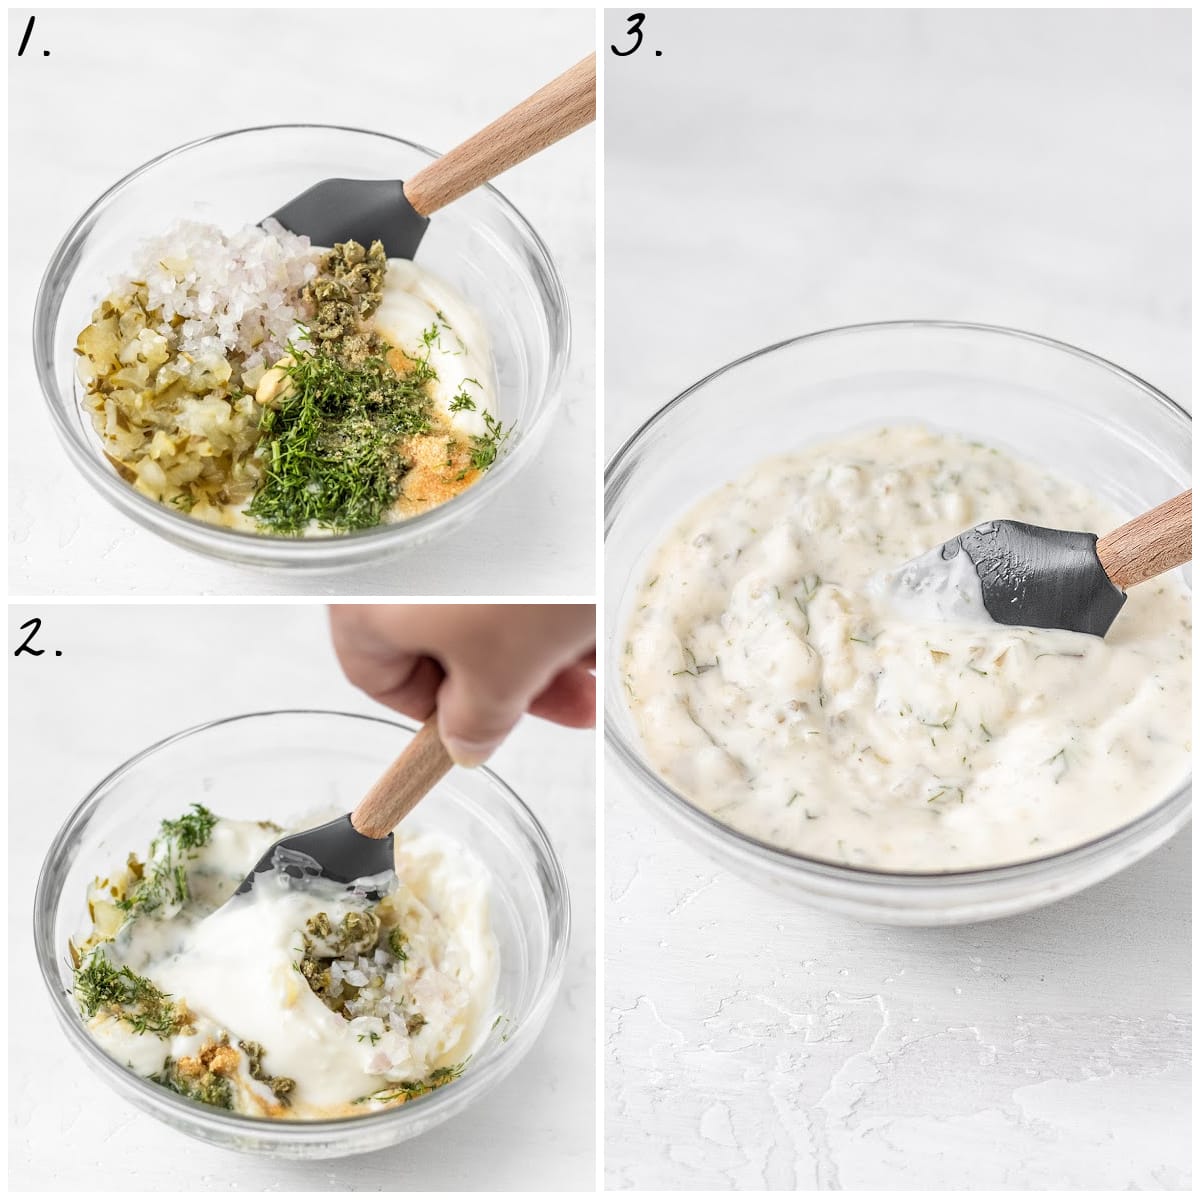 Three process photos showing how to make sauce in a glass mixing bowl.